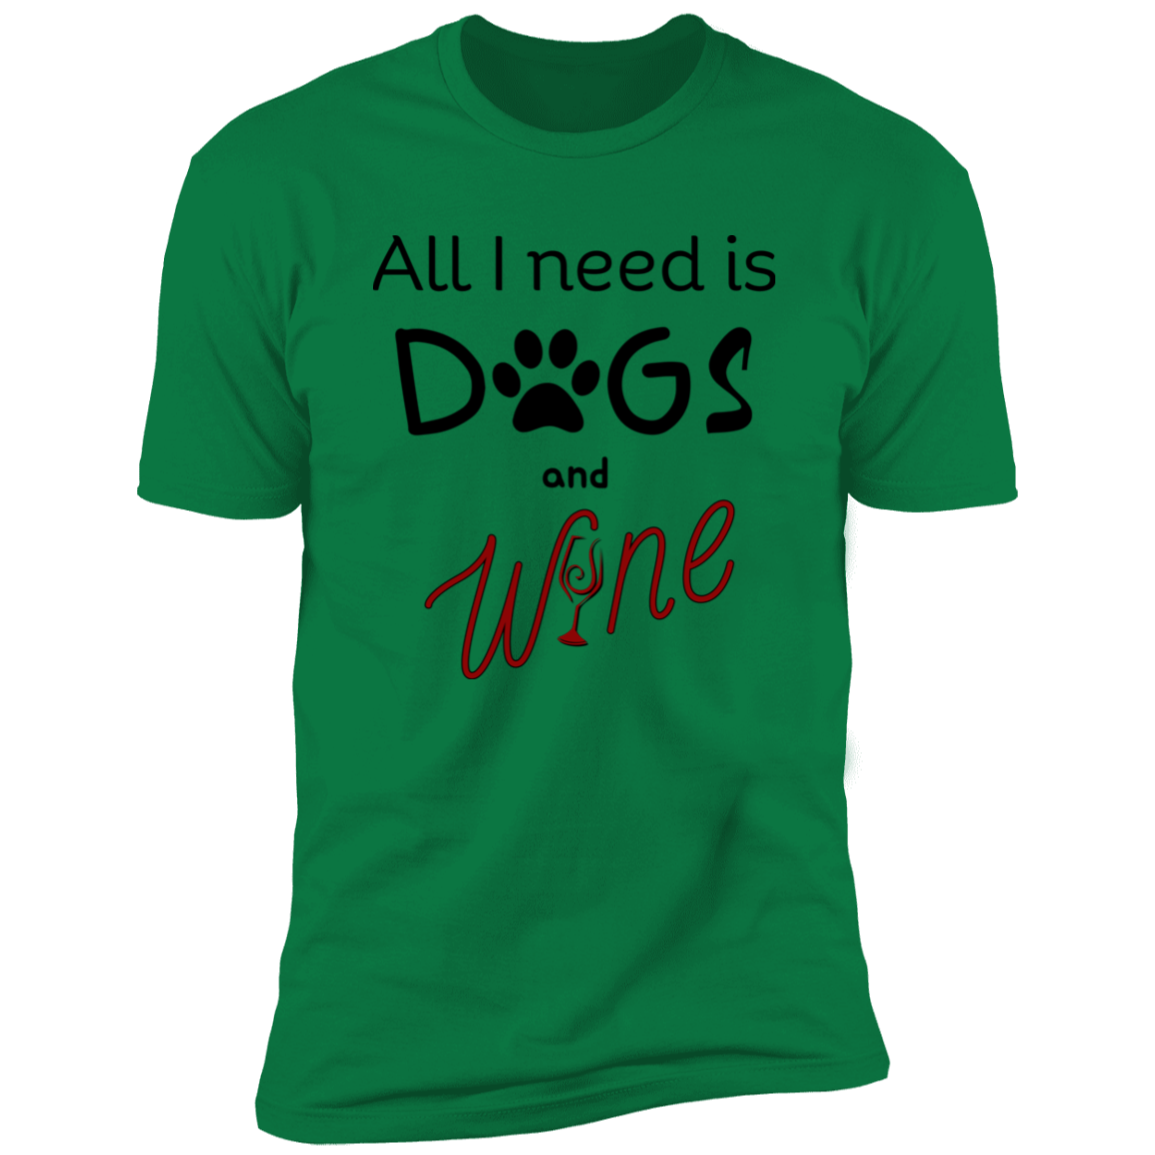 All I Need is Dogs and Wine T-shirt, Dog Shirt for humans, in kelly green